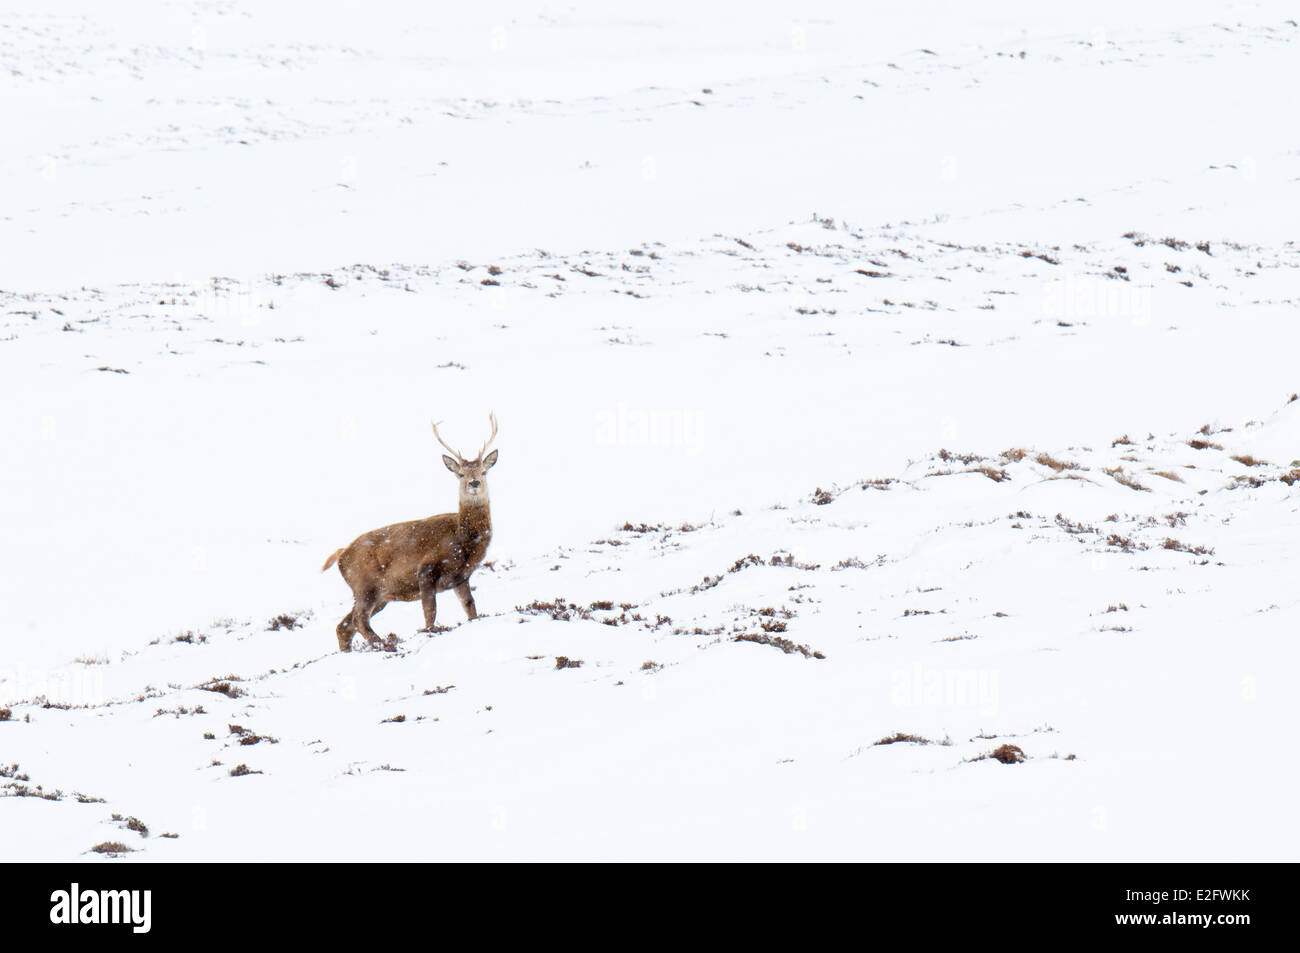 A red deer (Cervus elaphus) stag walking through a snow shower on a snow-covered mountainside in the Cairngorms National Park Stock Photo